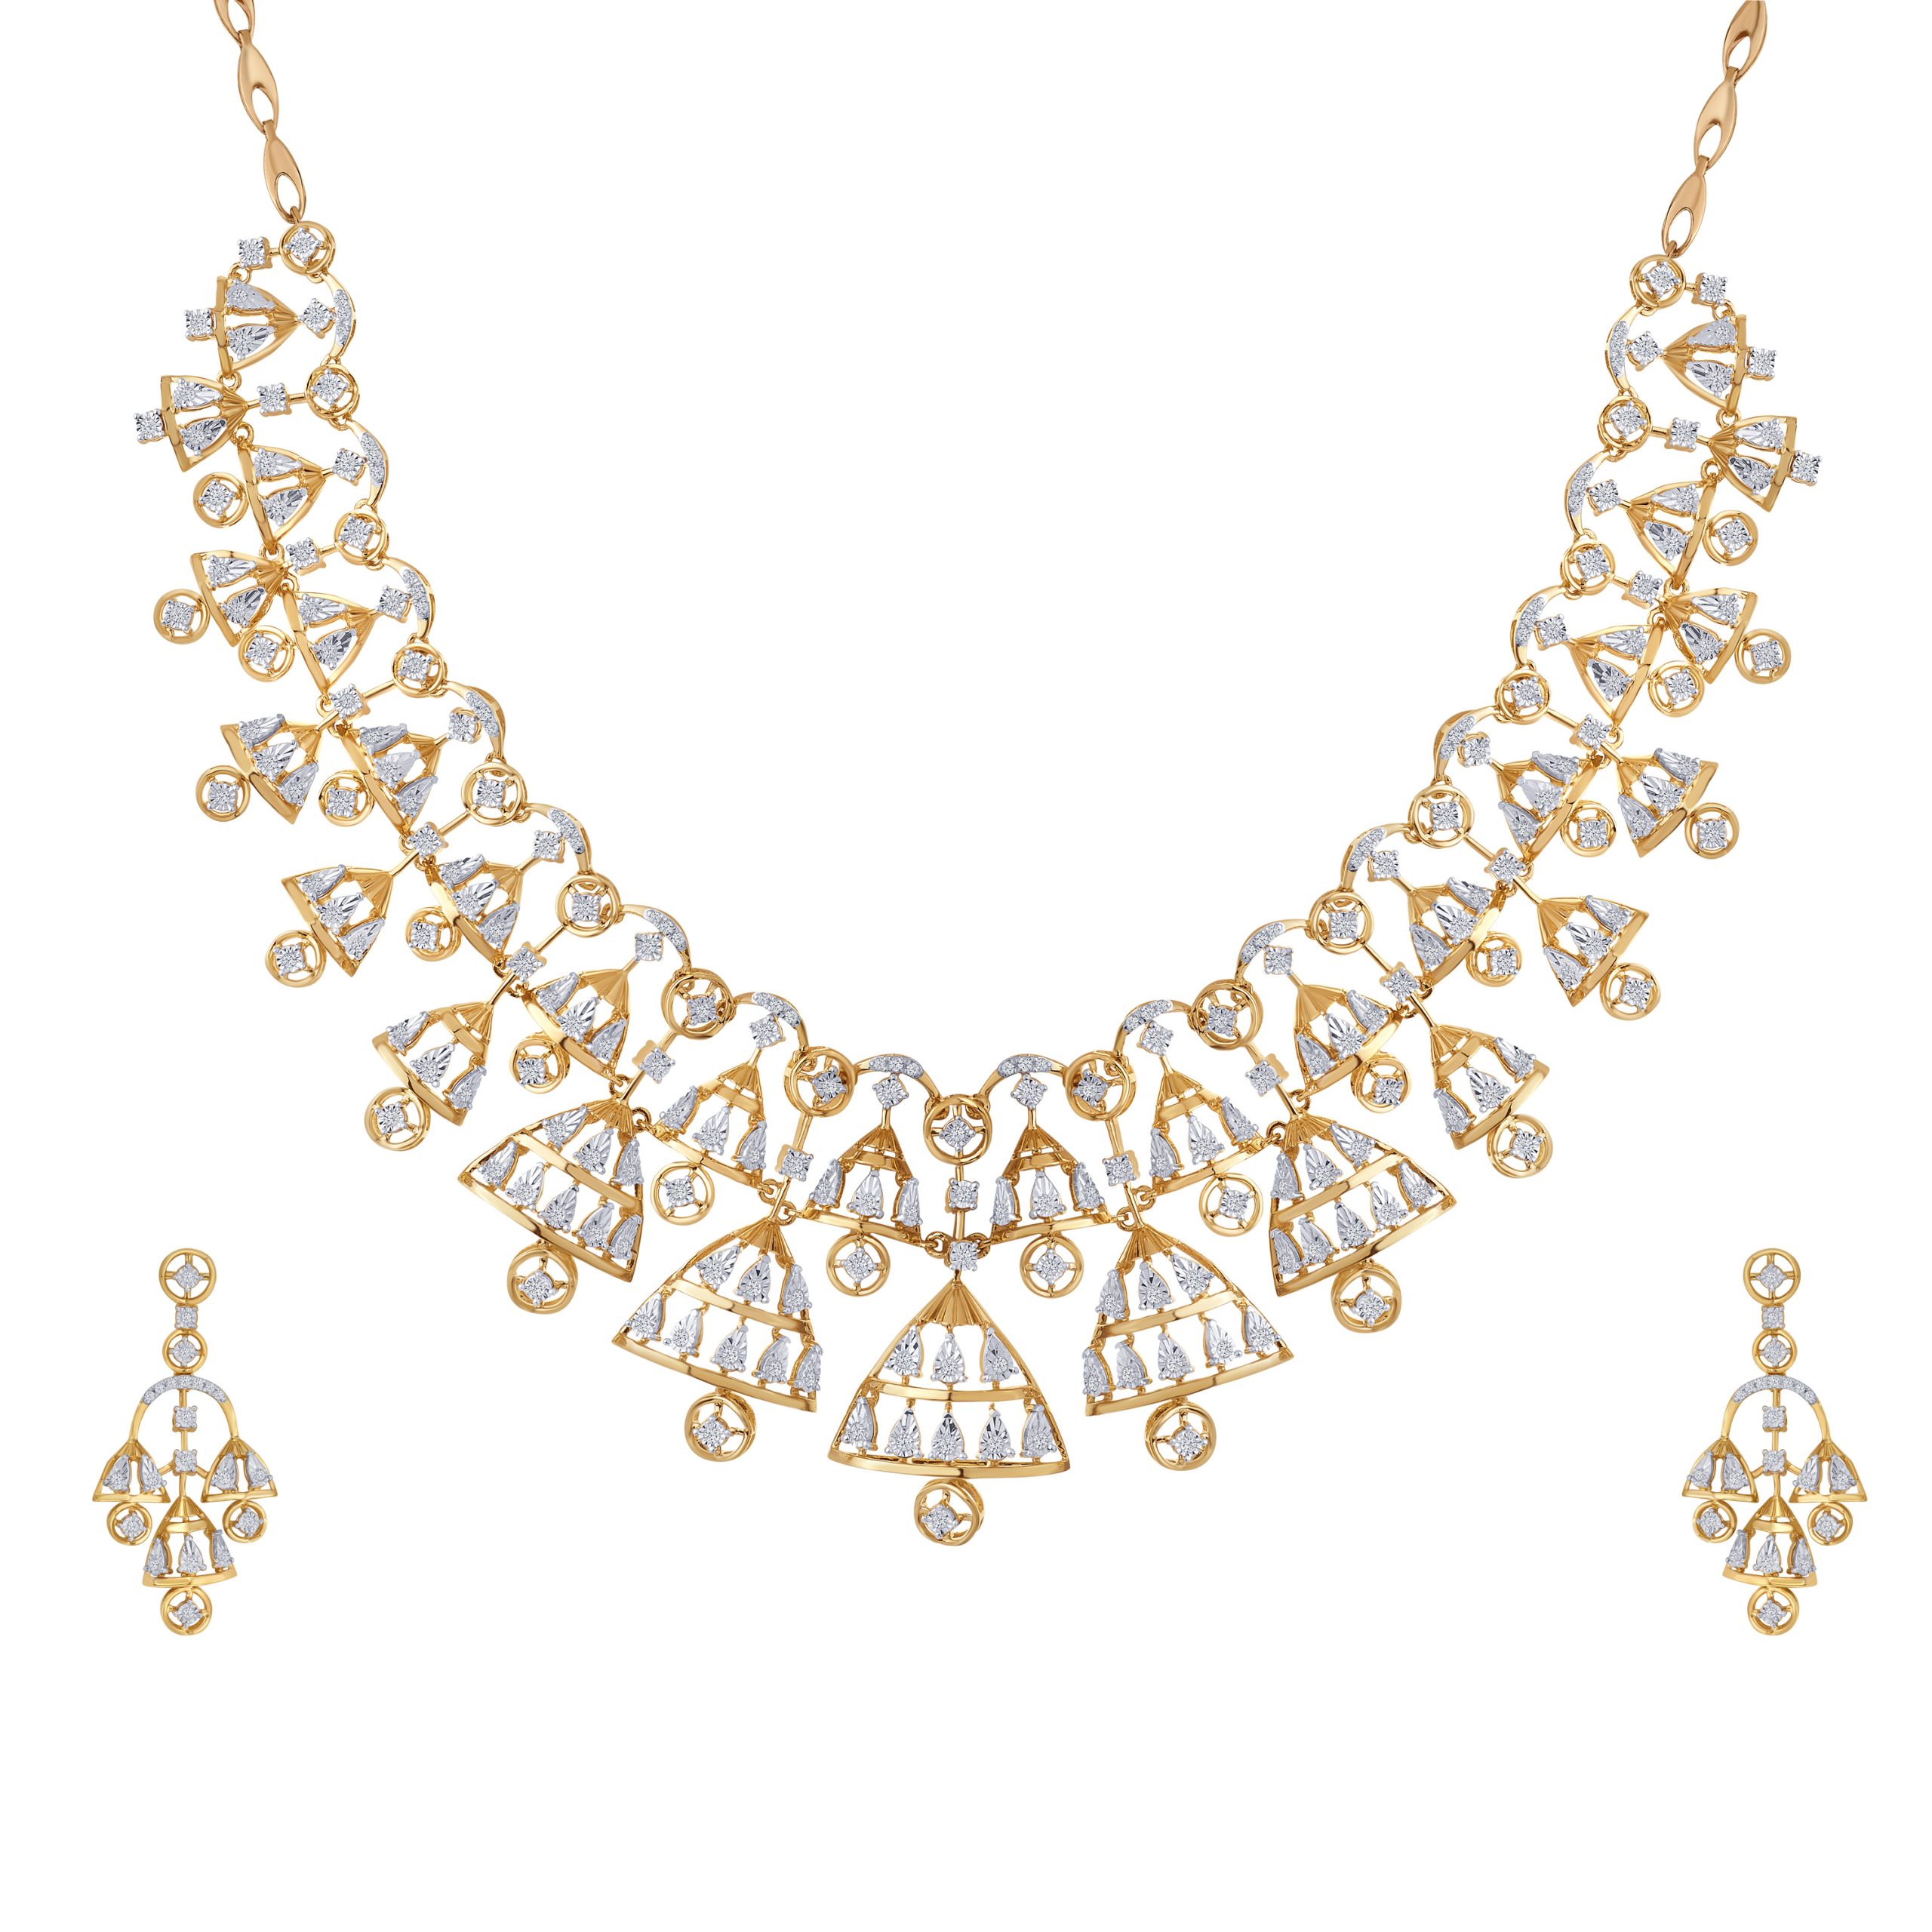 Reliance Jewels launches classic bridal jewellery line this wedding season